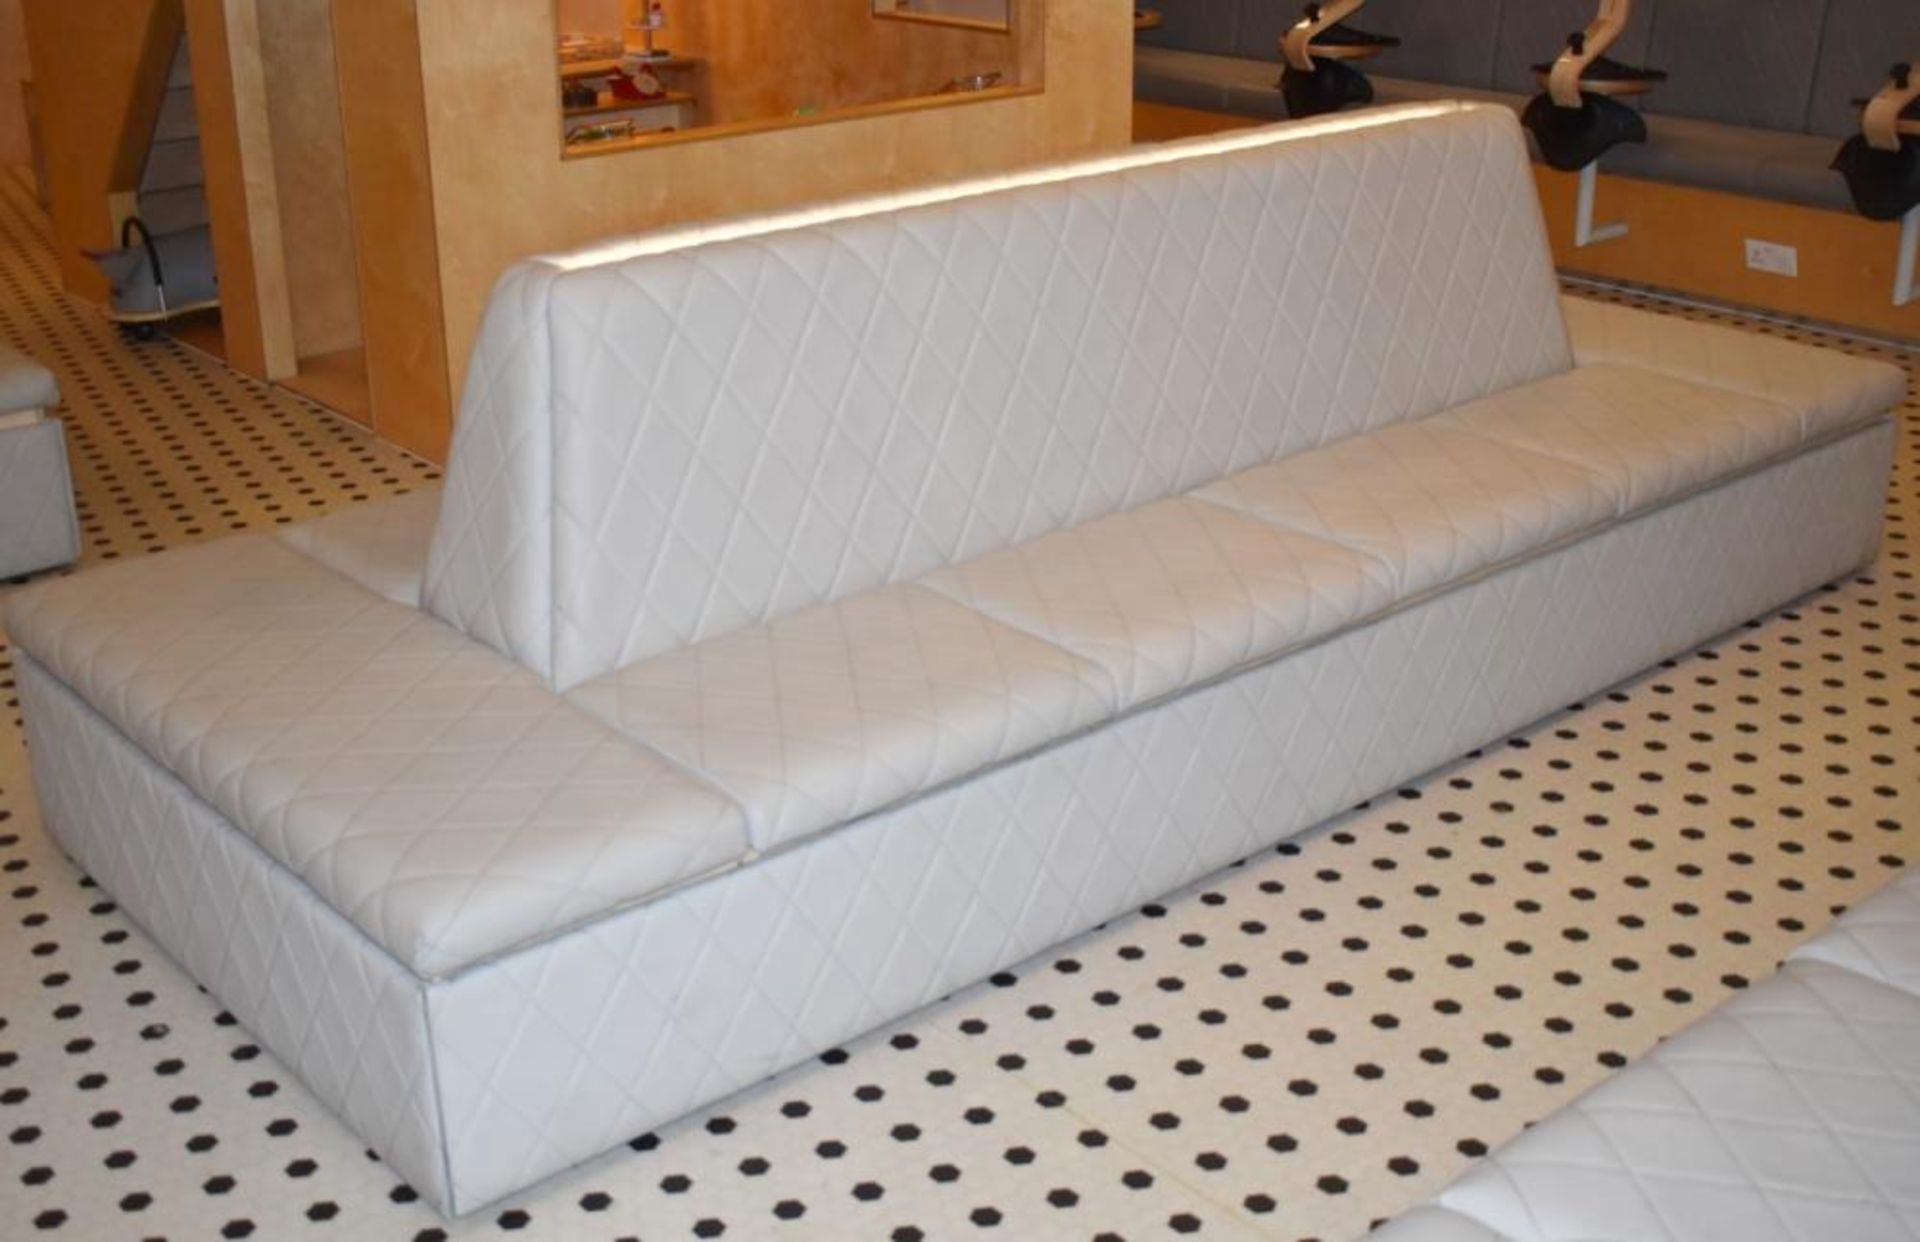 1 x Central Seating Banquette in a Contemporary Diamond Faux Grey Leather - Quality Build With Under - Image 2 of 7